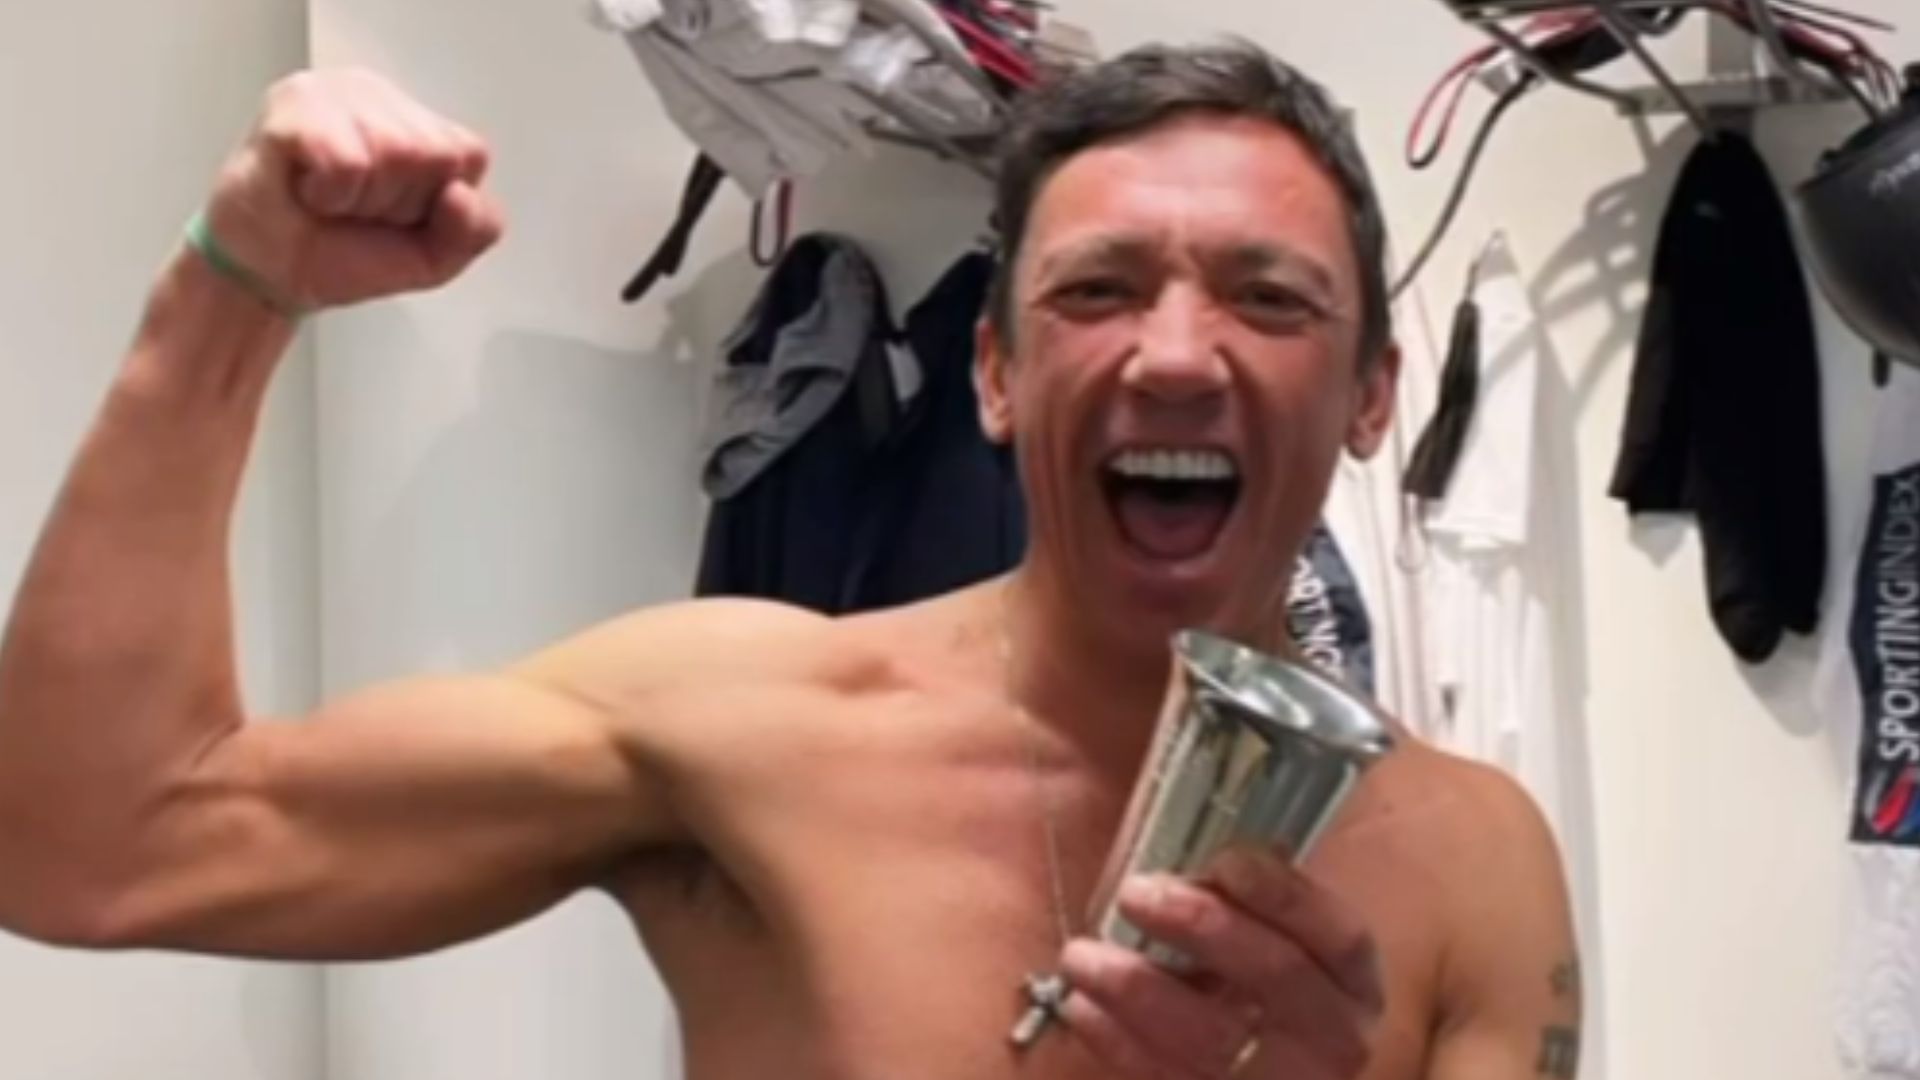 Frankie Dettori on ‘starvation’ rations in bid to make extreme weight after being overlooked for rides worth 3.2million [Video]